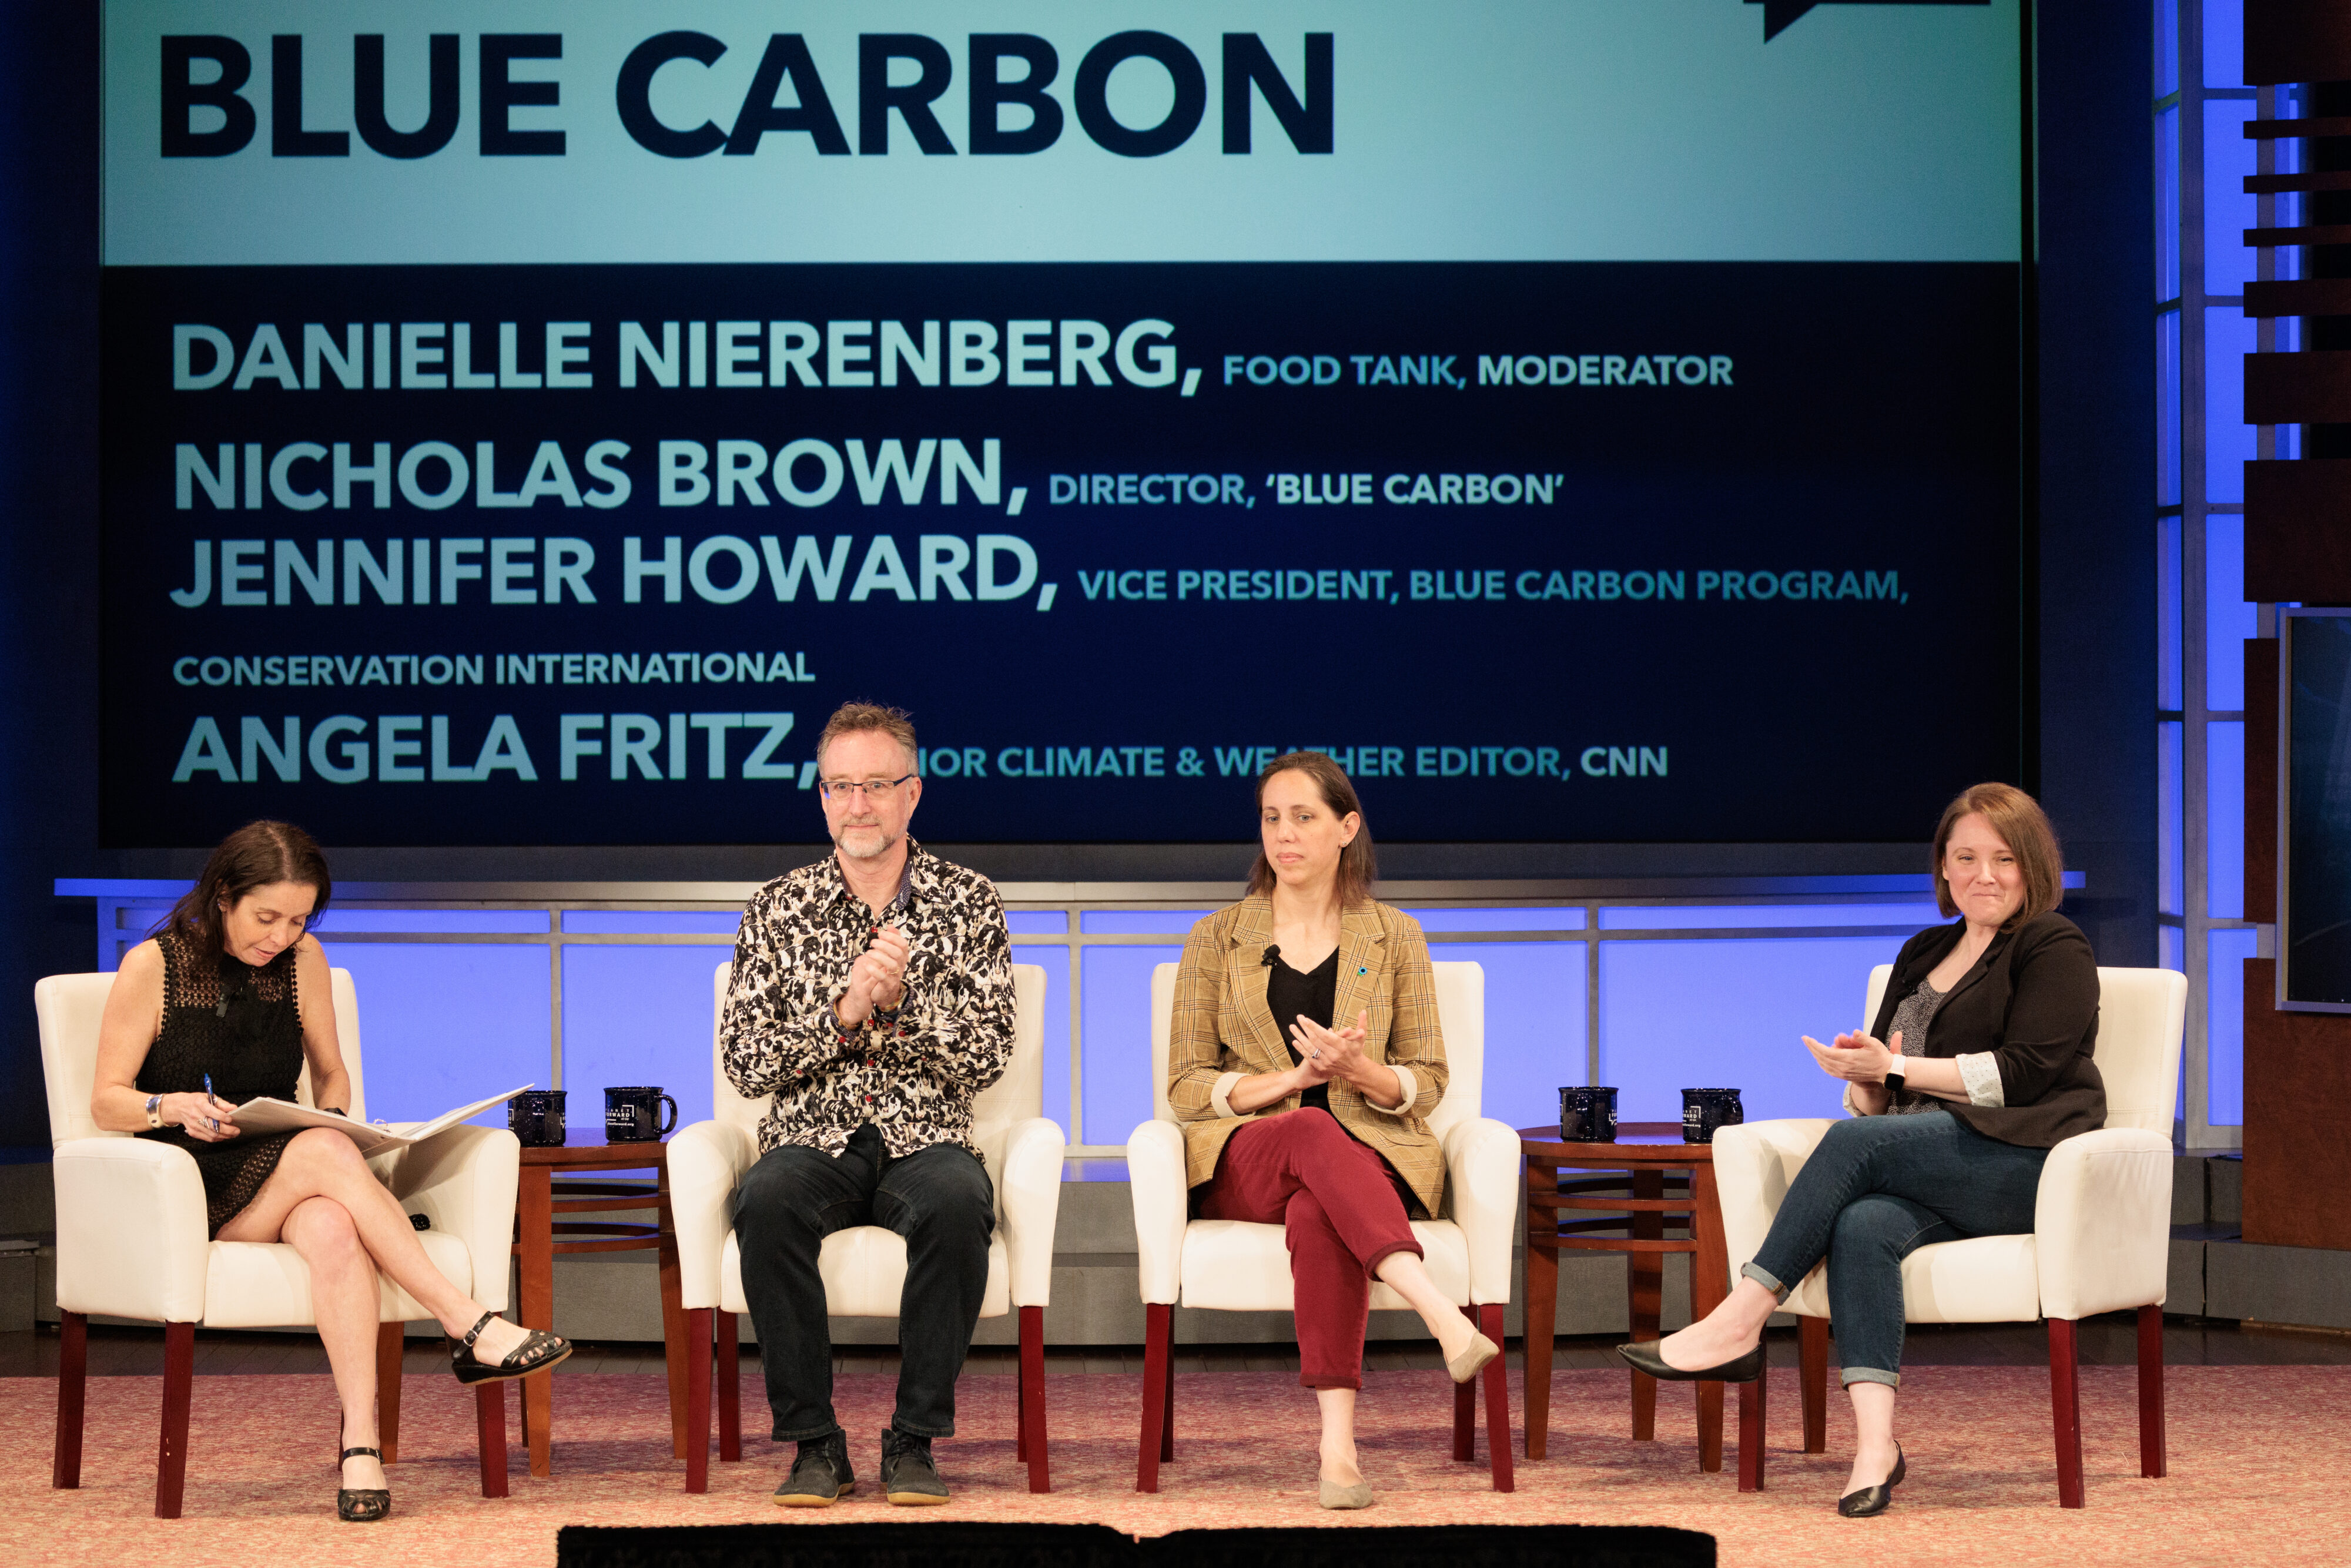 From left: Danielle Nierenberg, Food Tank; Nicholas Brown, Director Blue Carbon; Jennifer Howard, Vice President, Blue Carbon Program, Conservation International; and Angela Fritz, Senior Climate and Weather Editor, CNN; discuss the CNN documentary, Blue Carbon.